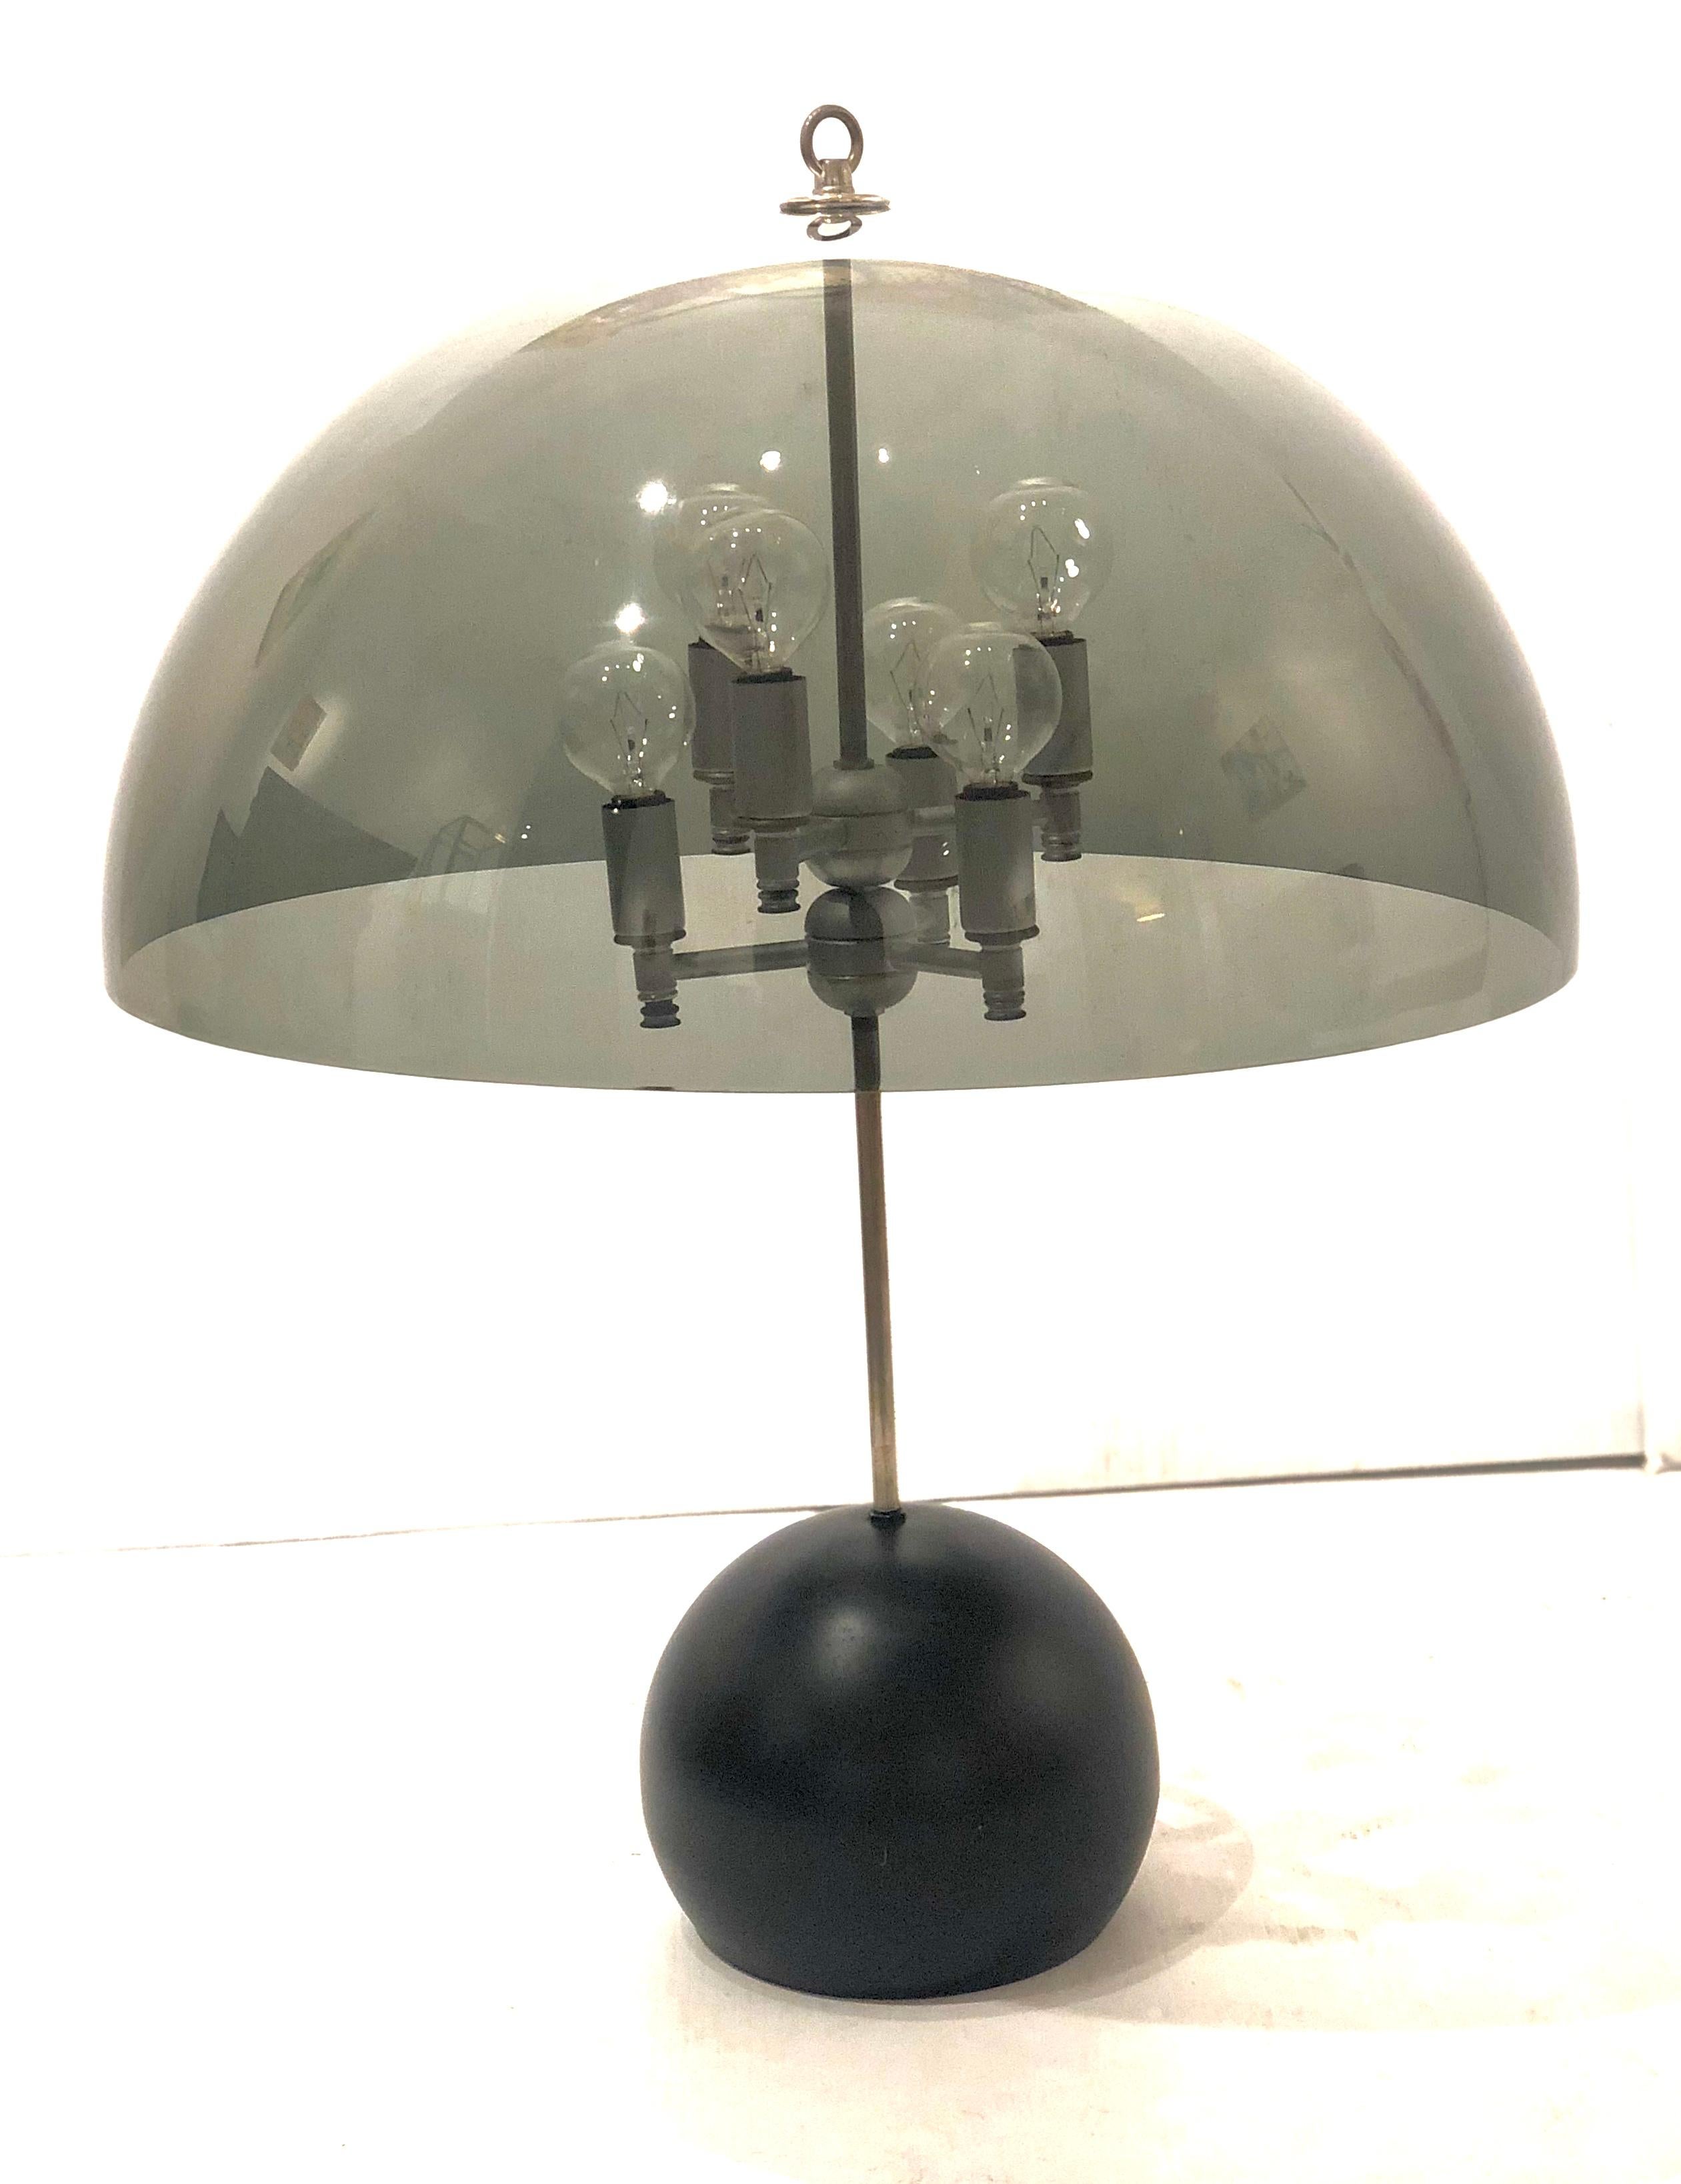 Rare mushroom lamp with smoke Lucite shade circa 1970s, American made chrome and black enameled base the lamp has been rewired, and works great, takes up to forty watts per light bulb, with capacity for six lightbulbs. We have polished and clean the